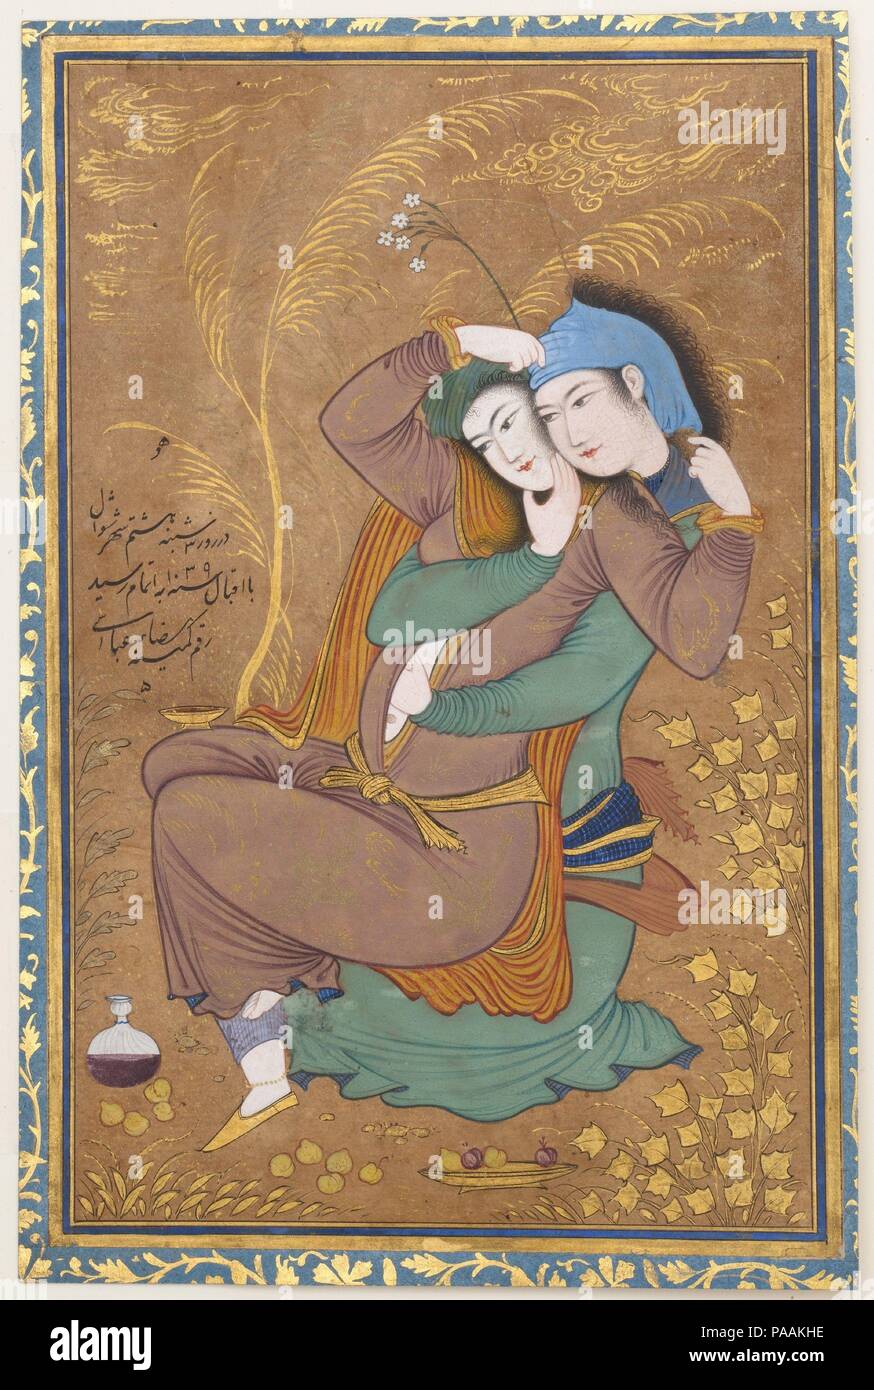 The Lovers. Artist: Painting by Riza-yi `Abbasi (Persian, ca. 1565-1635). Dimensions: Painting: H. 6 7/8 in. (17.5 cm)   W. 4 3/8 in. (11.1 cm)  Page: H. 7 1/2 in. (19.1 cm)  W. 4 15/16 in. (12.5 cm)  Mat: H. 19 1/4 in. (48.9 cm)  W. 14 1/4 in. (36.2 cm). Date: dated A.H. 1039/ A.D. 1630.  The artist Riza-yi 'Abbasi revolutionized Persian painting and drawing with his inventive use of calligraphic line and unusual palette. He painted The Lovers toward the end of a long, successful career at the Safavid court. The subject of a couple entwined reflects a newly relaxed attitude to sensuality intr Stock Photo